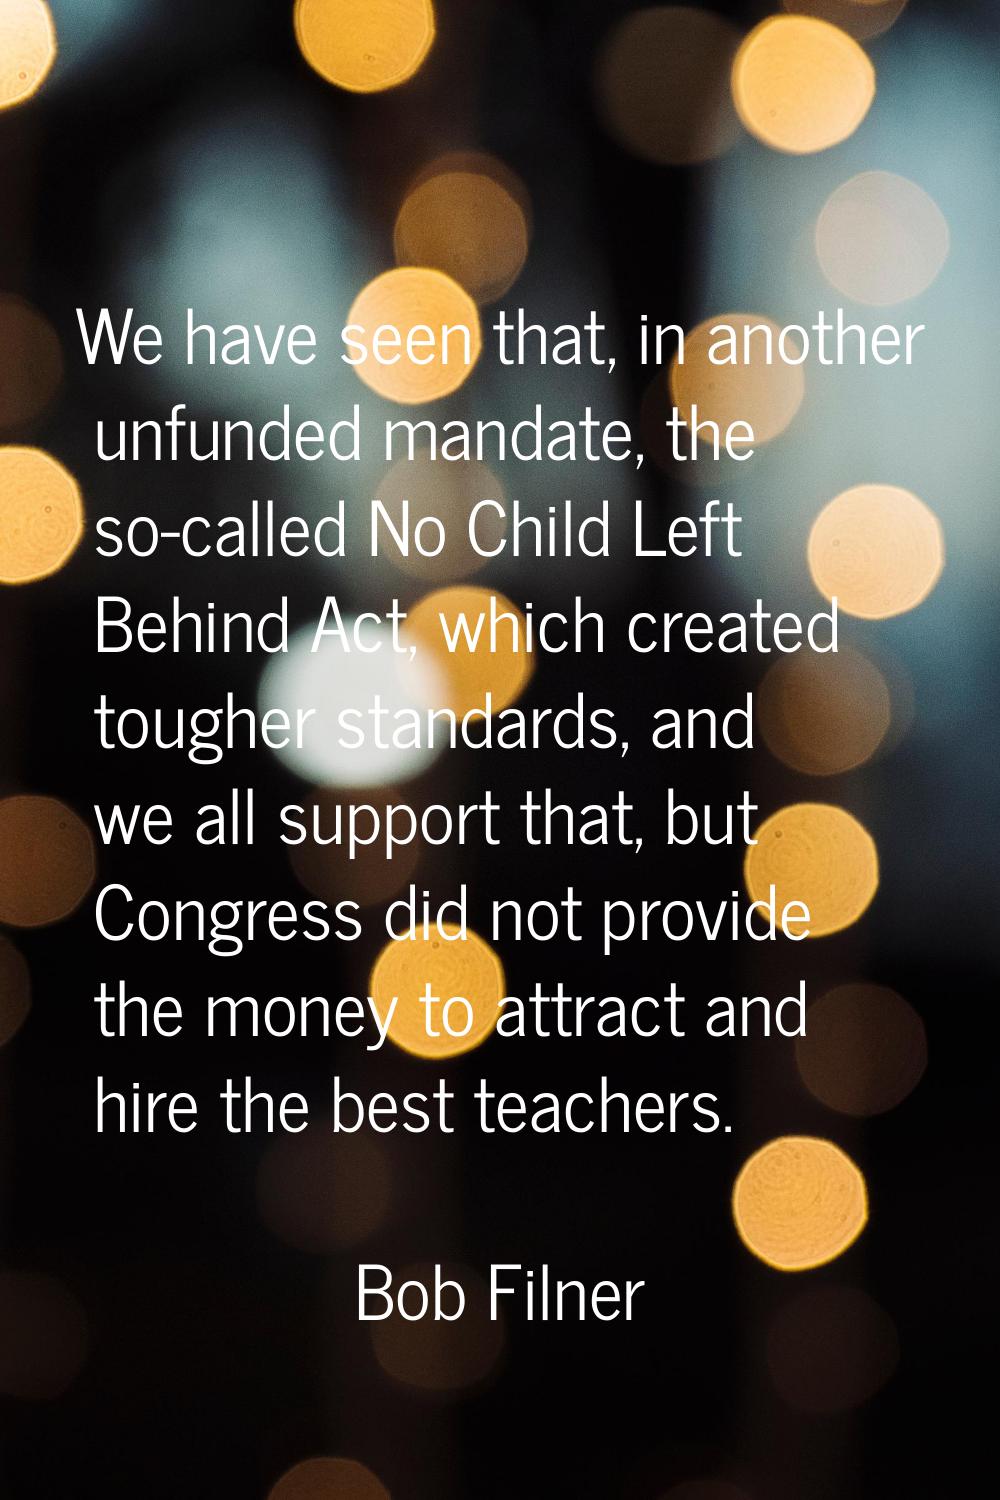 We have seen that, in another unfunded mandate, the so-called No Child Left Behind Act, which creat